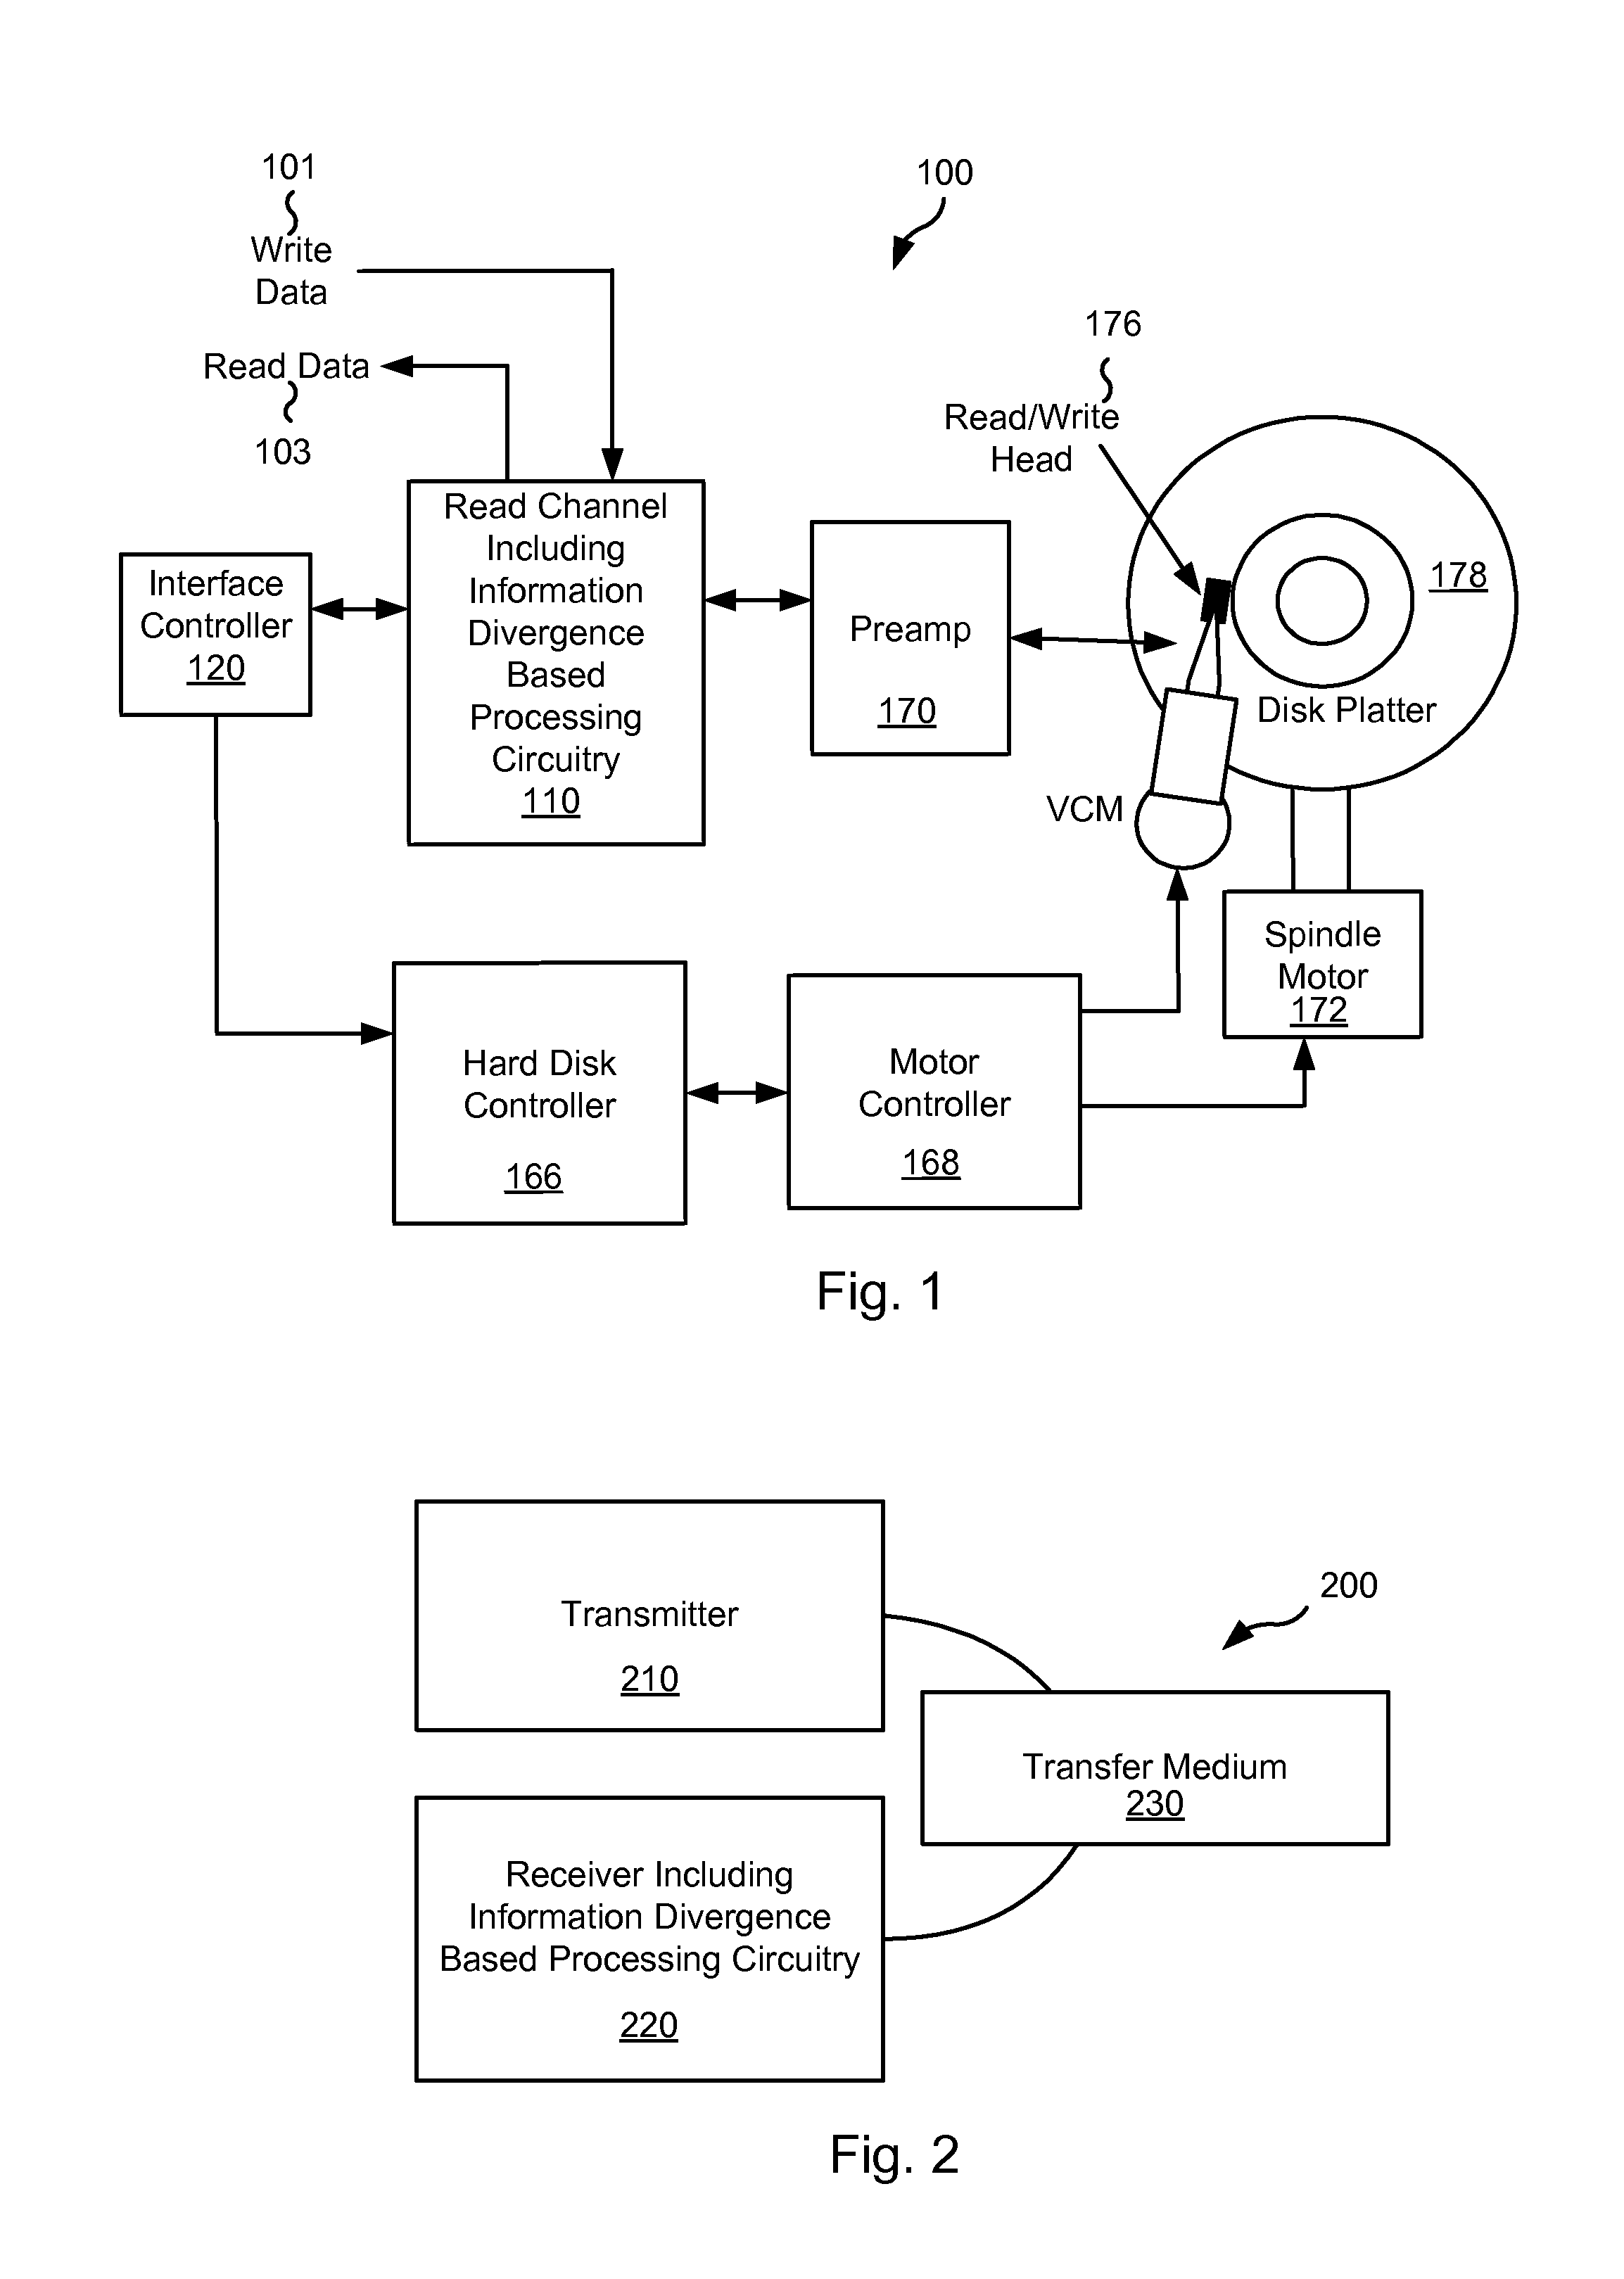 Systems and Methods for Information Divergence Based Data Processing